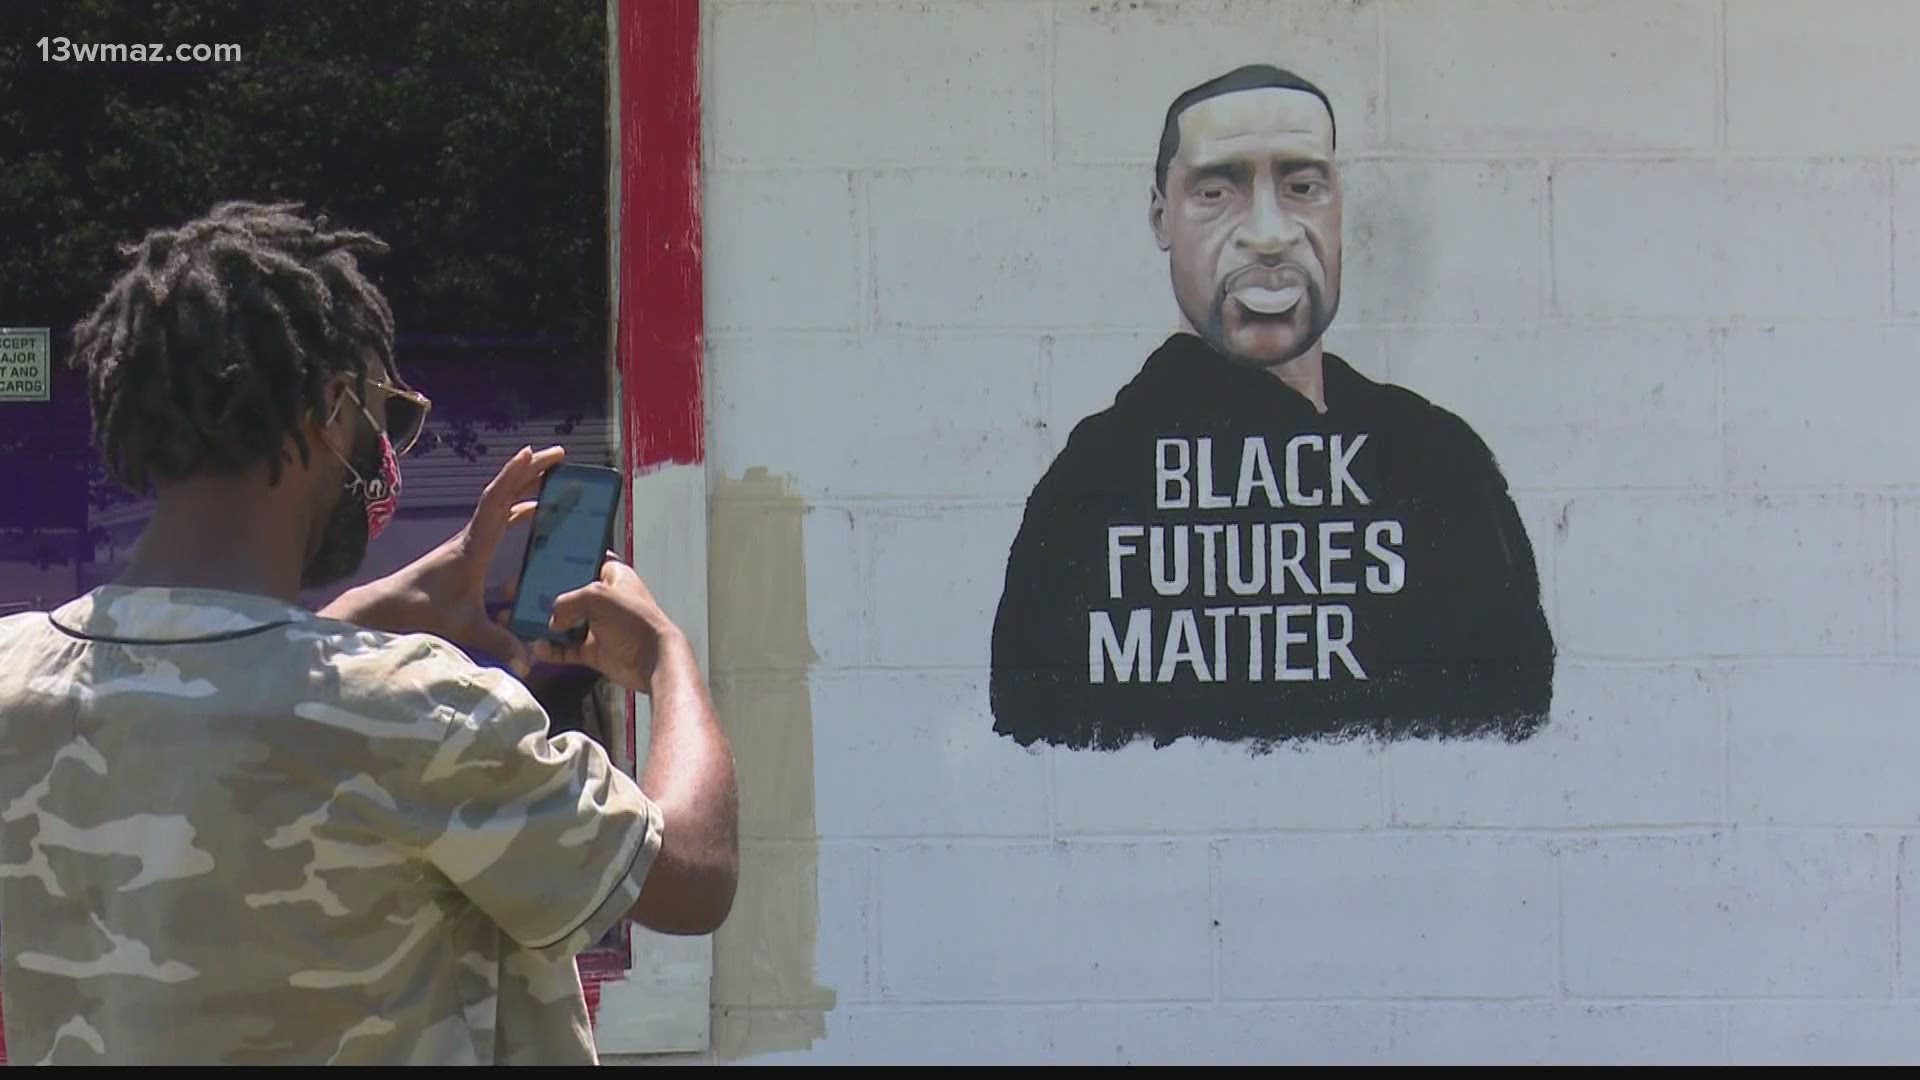 It took Asad Thomas four days to complete a mural of George Floyd, a Minnesota 46-year-old who died after an encounter with police in May.